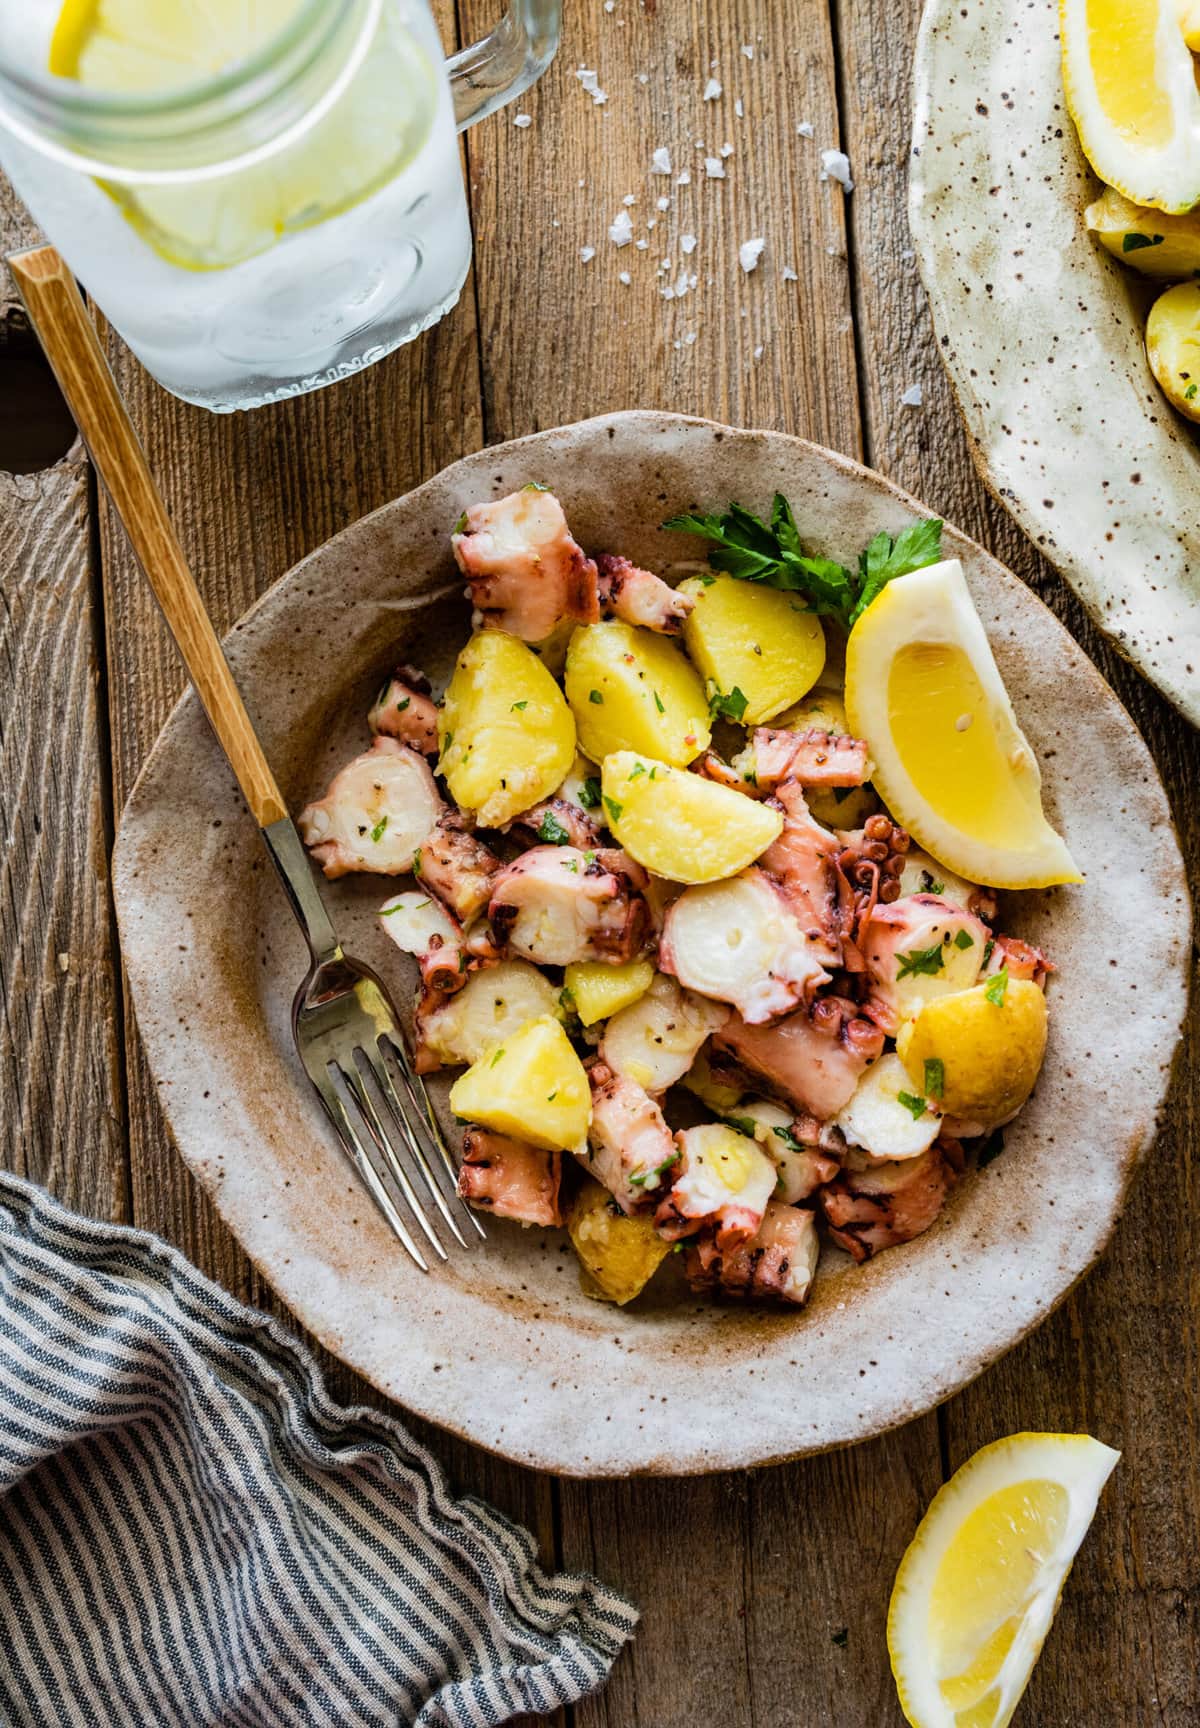 Italian Octopus Salad Recipe with Potatoes (Insalata Di Polpo) in a plate with a fork.